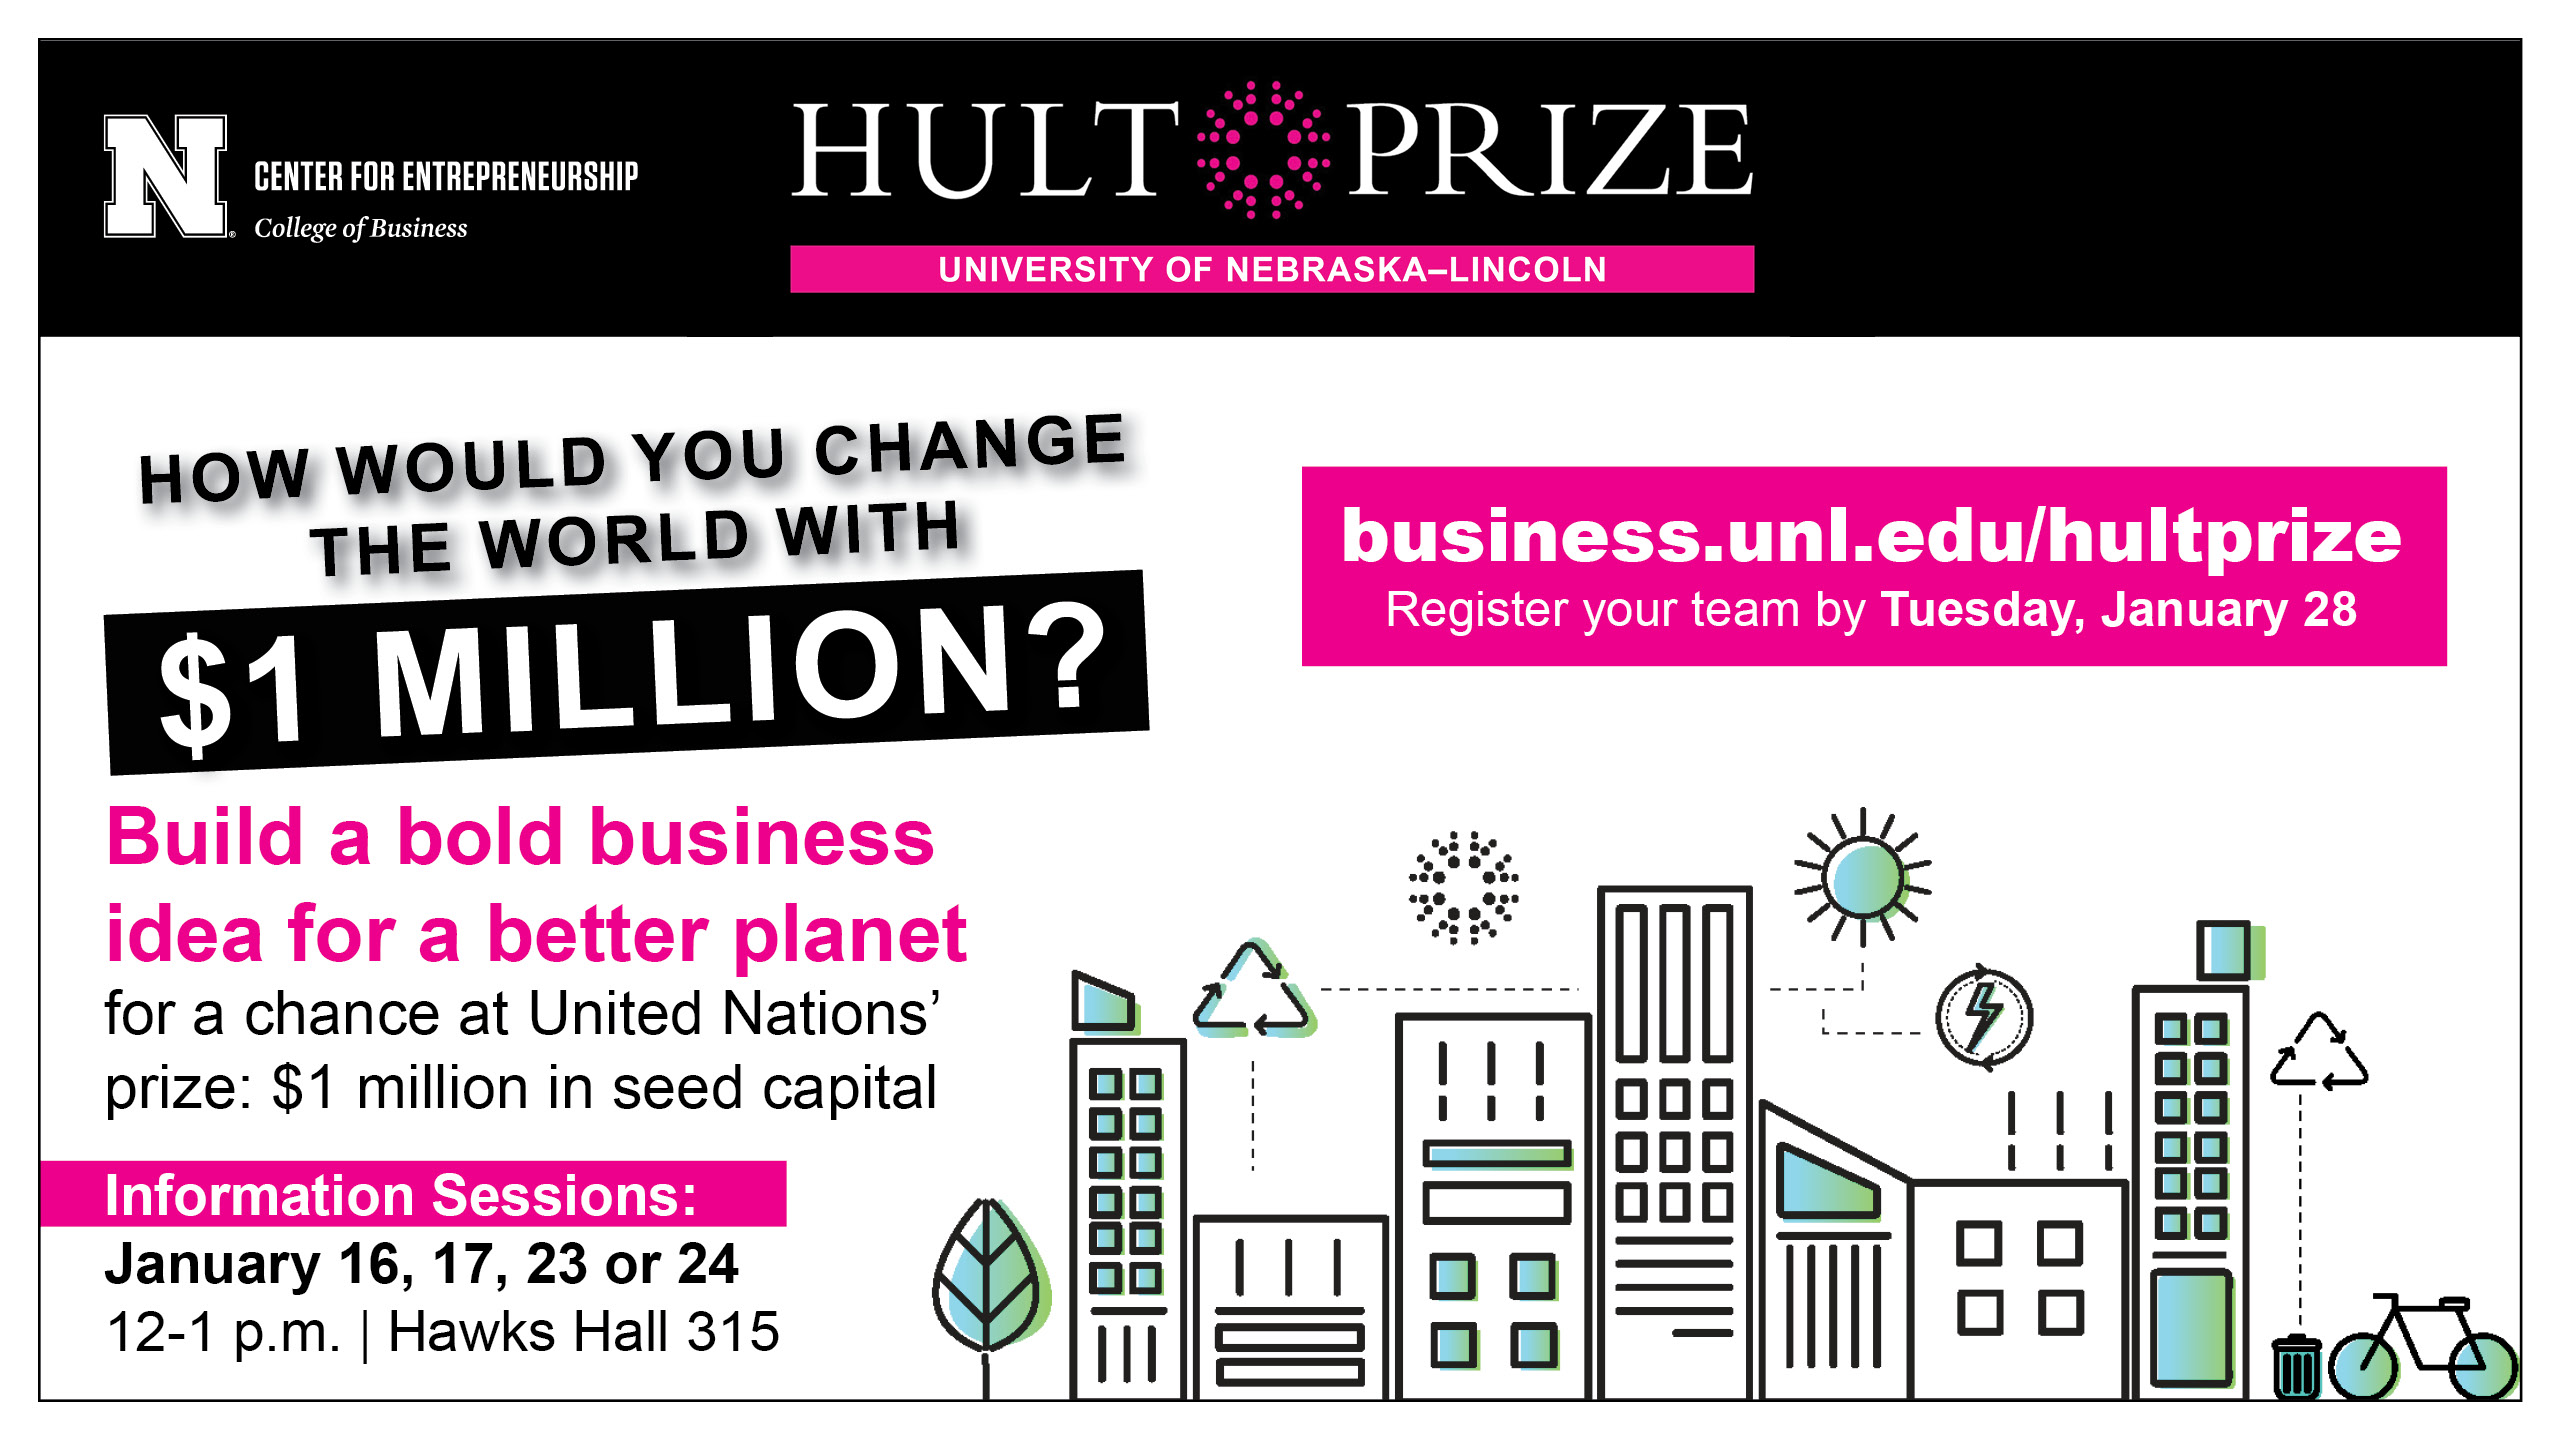 Register for Hult Prize at business.unl.edu/hultprize by Tuesday, January 28.